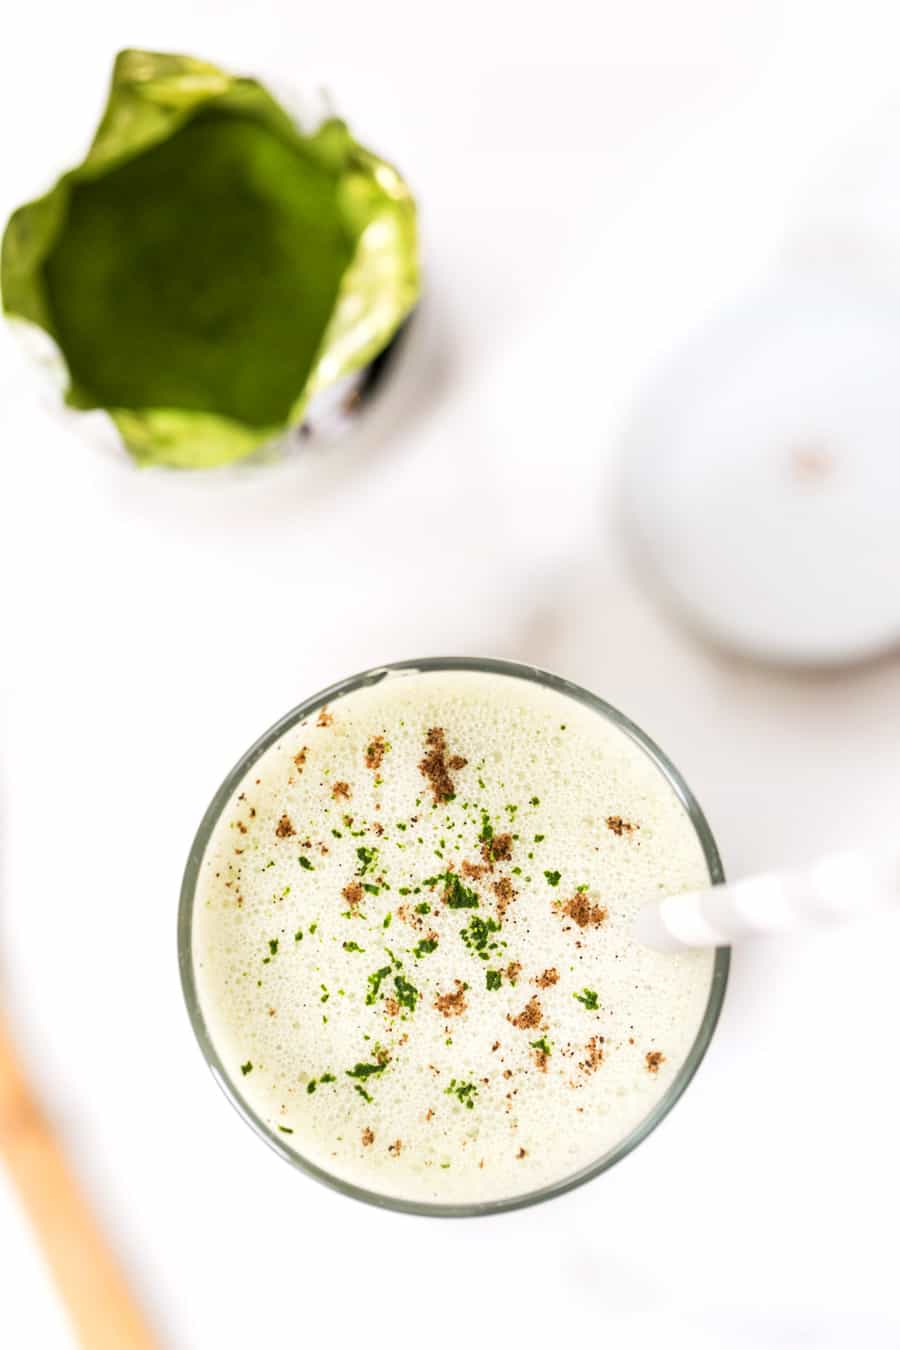 ICED MATCHA LATTES with medicinal mushrooms and coconut butter for added energy and nutrition!